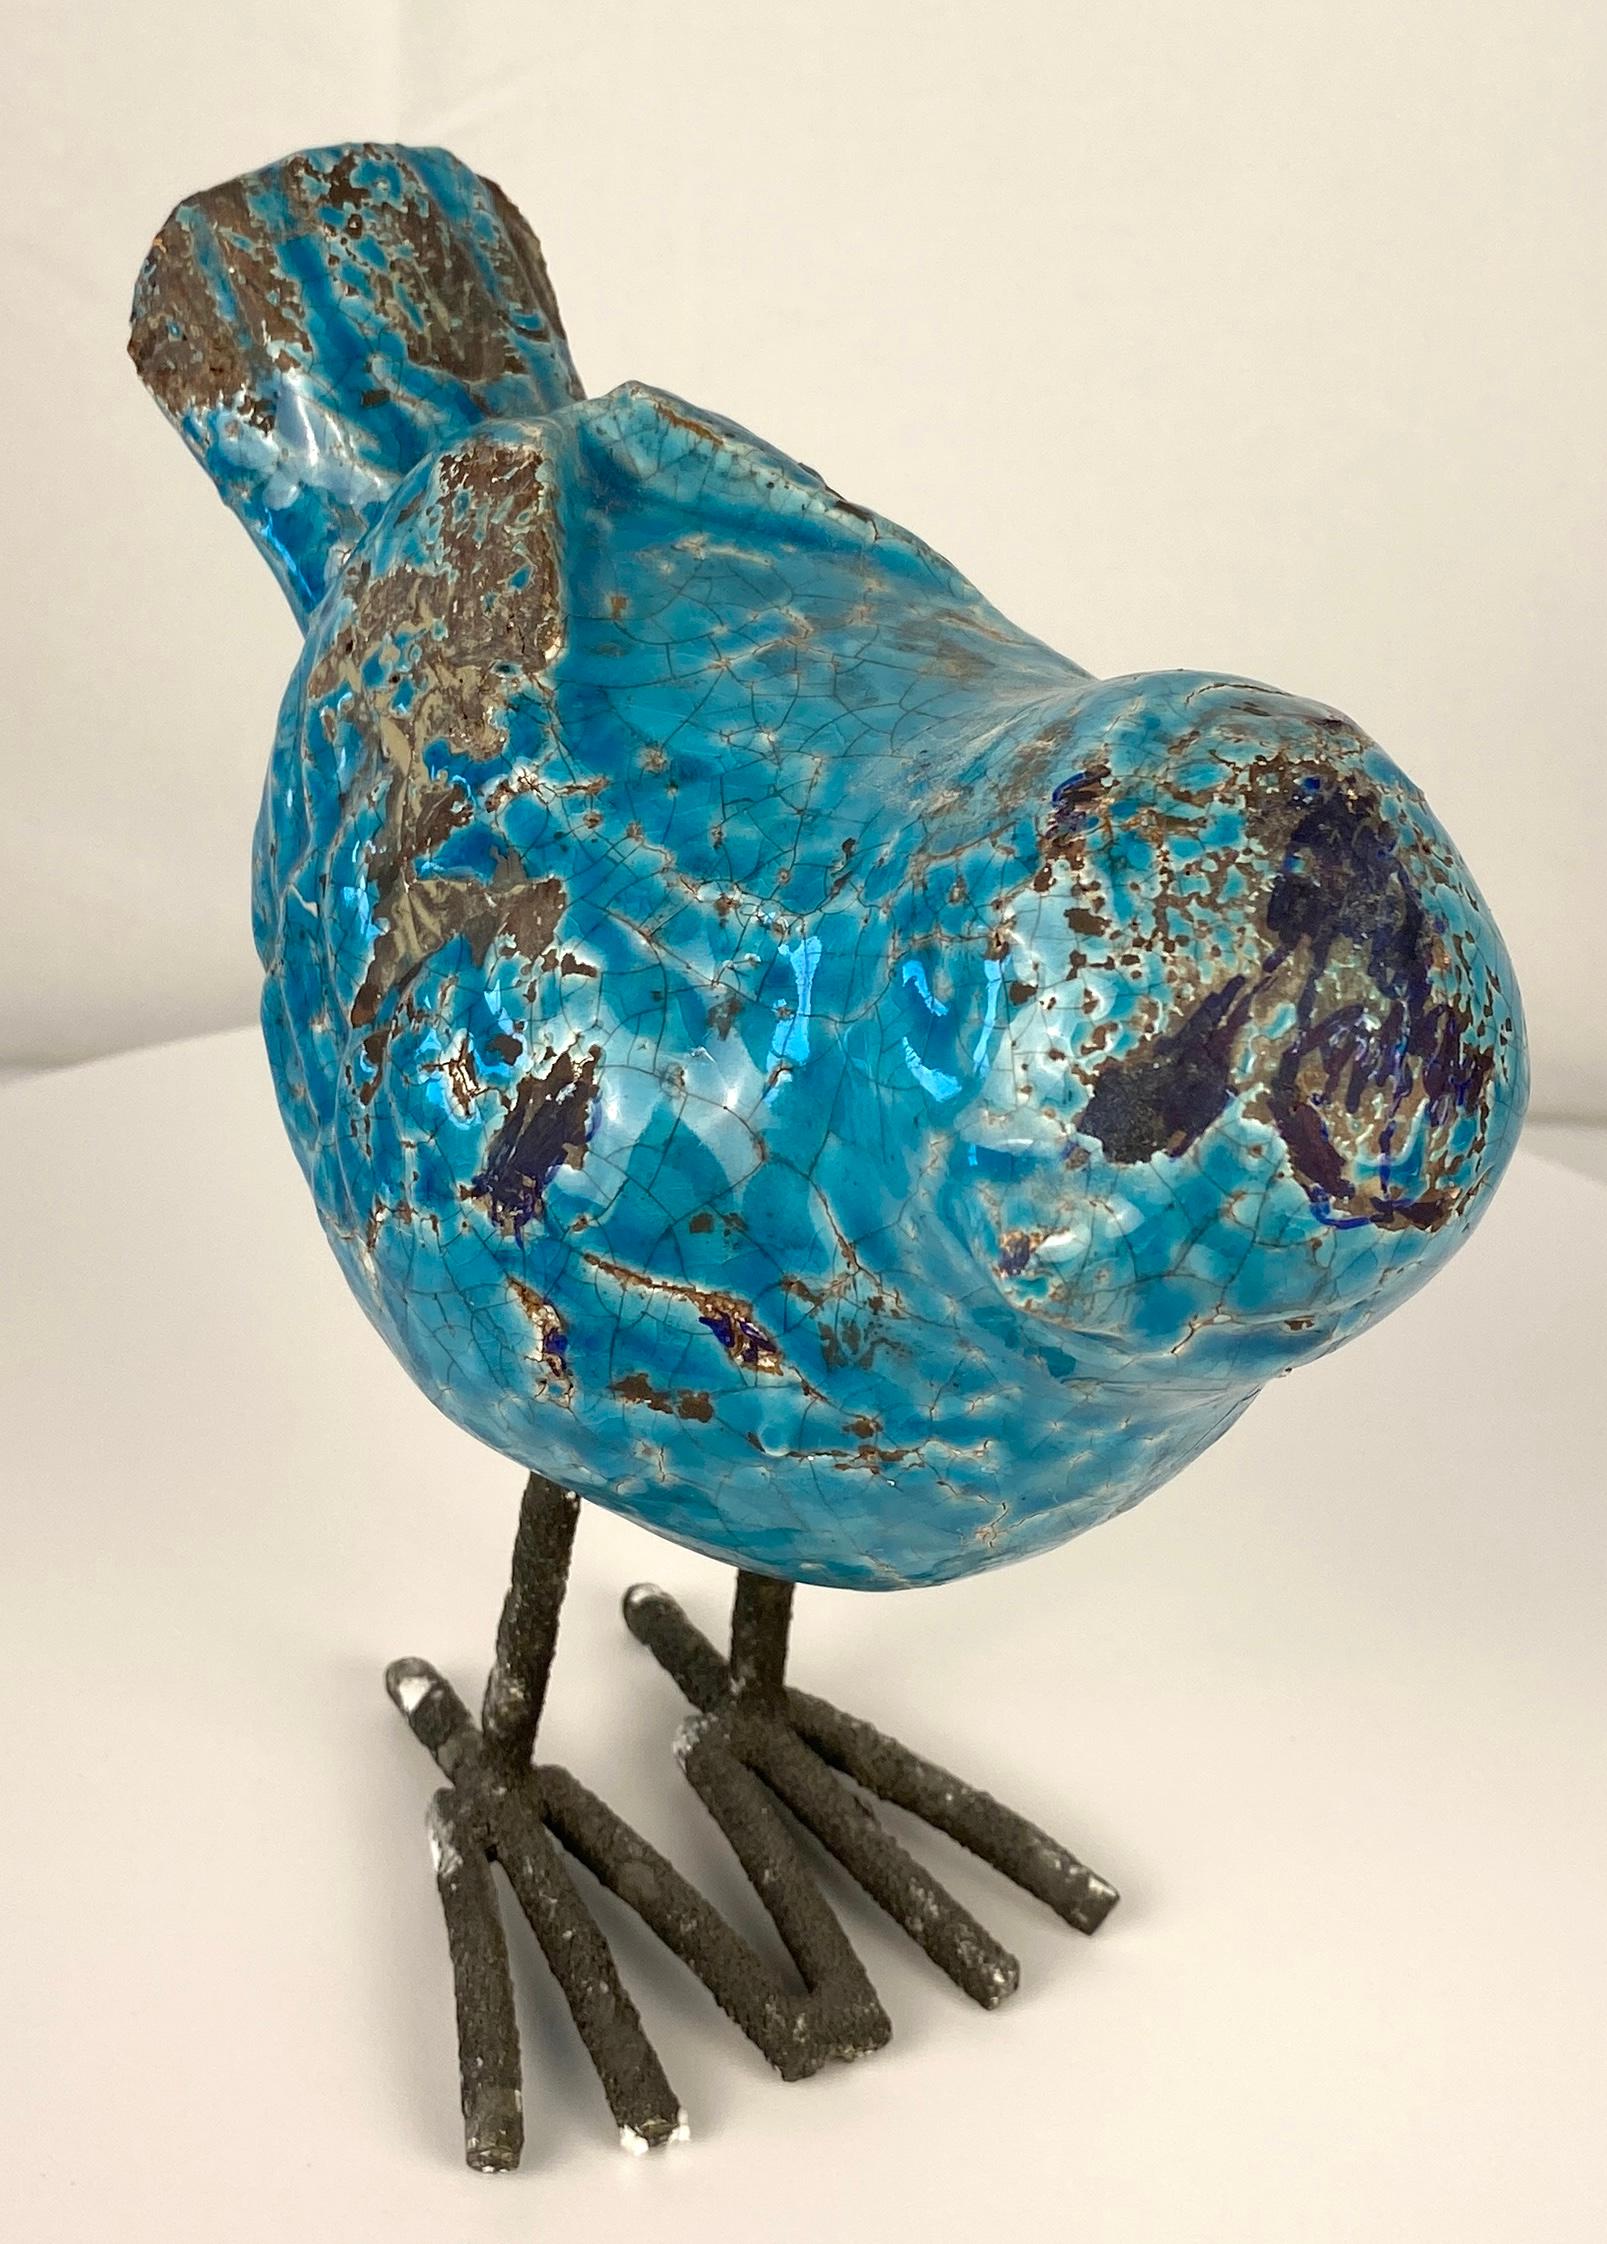 Hand-Painted Pair of Ceramic Bird Sculptures Blue Colored Animal Sculptures For Sale